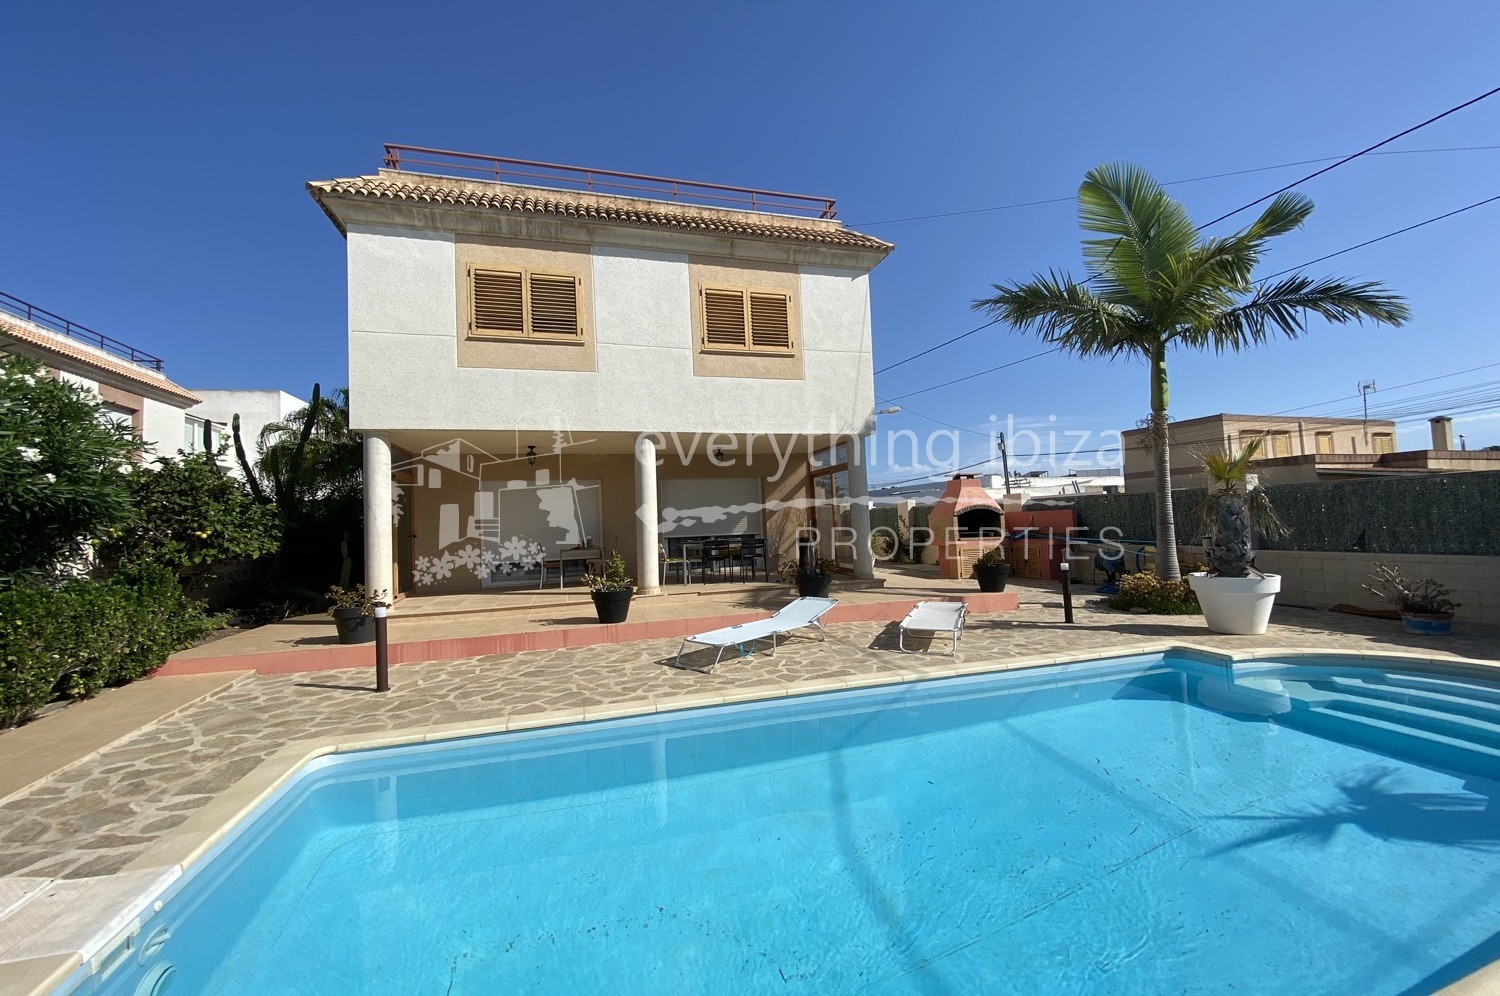 Lovely detached villa for sale by everything ibiza Properties